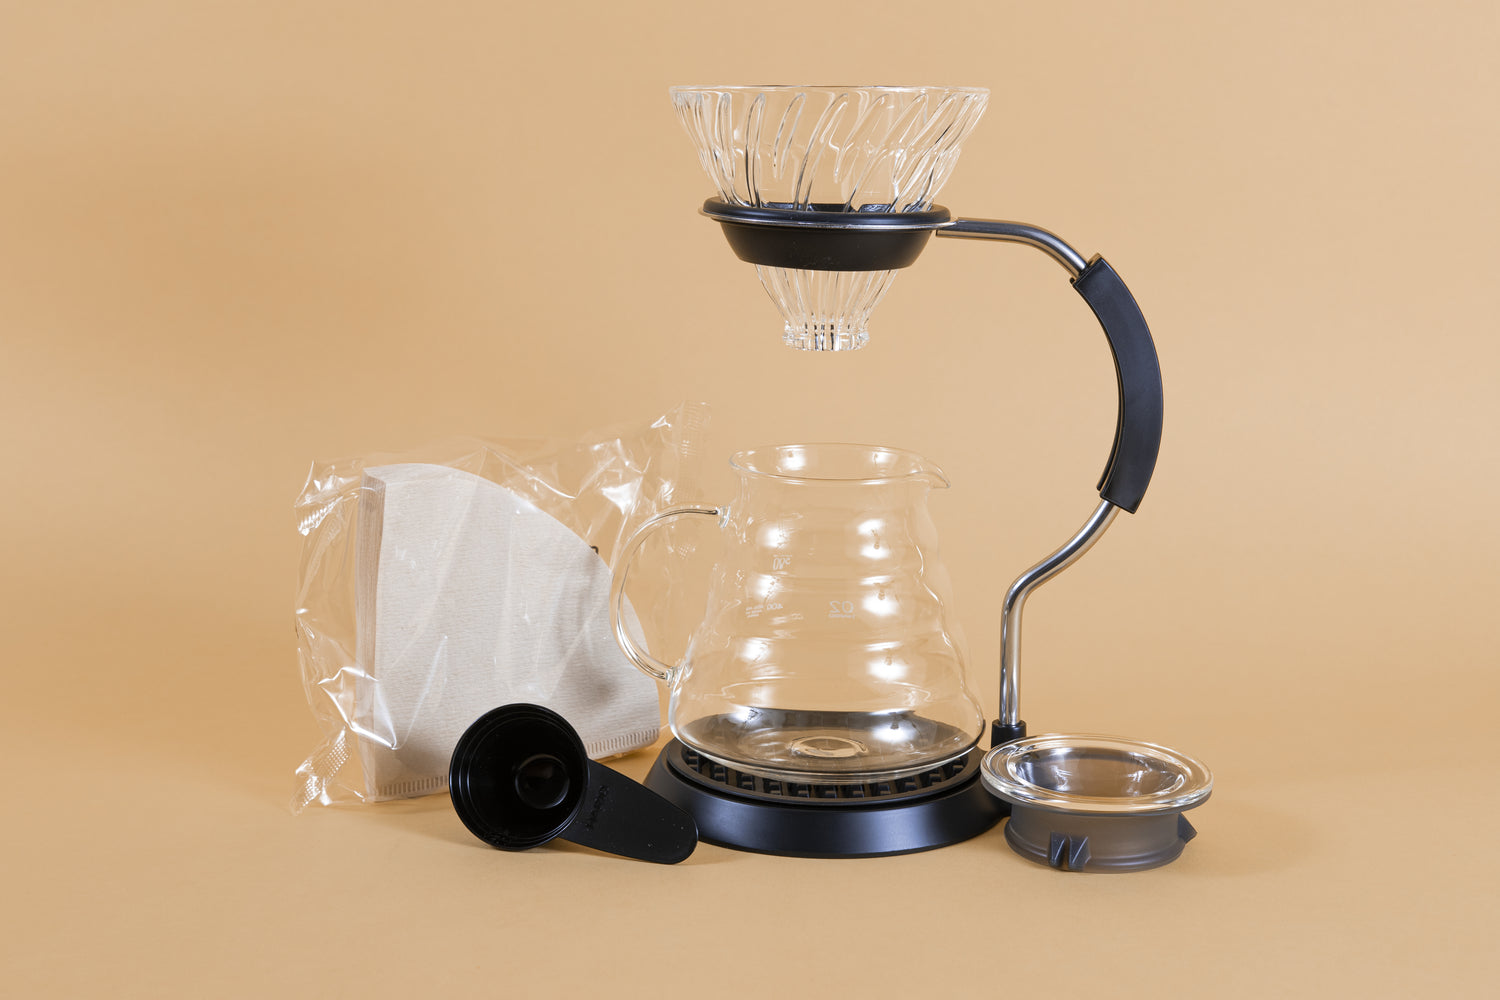 Hario Pour Over Starter Set with Dripper, Glass Server Scoop and Filters,  Size 02, Black